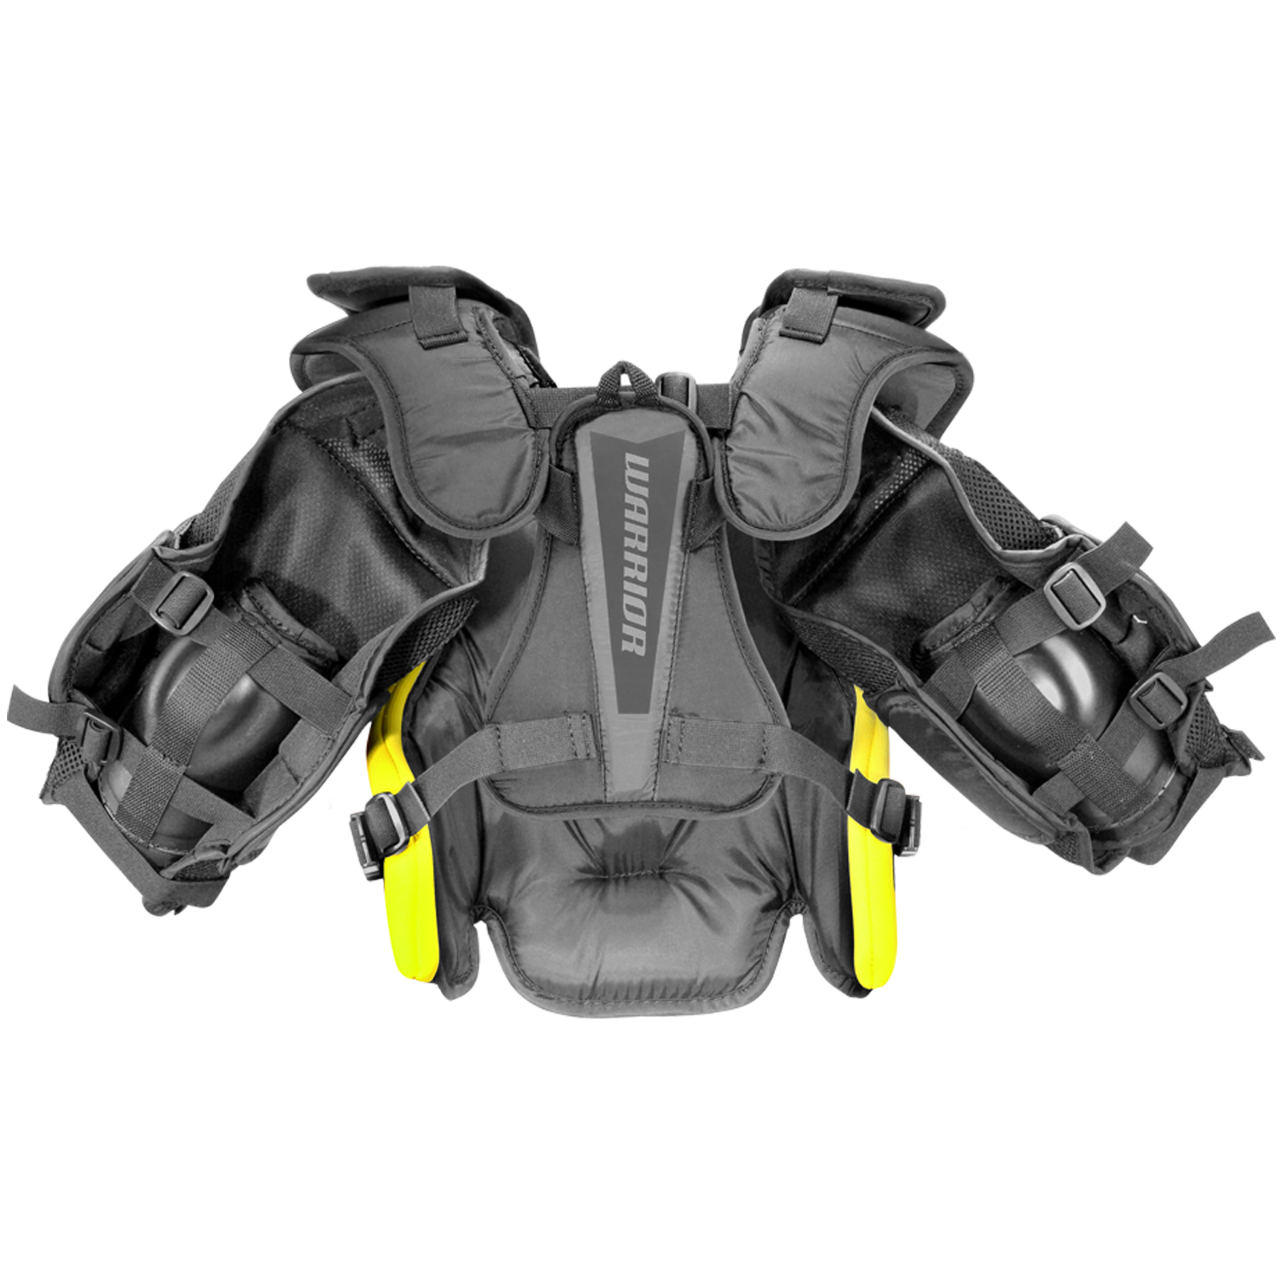 Warrior Ritual G5 Youth Goalie Chest Protector